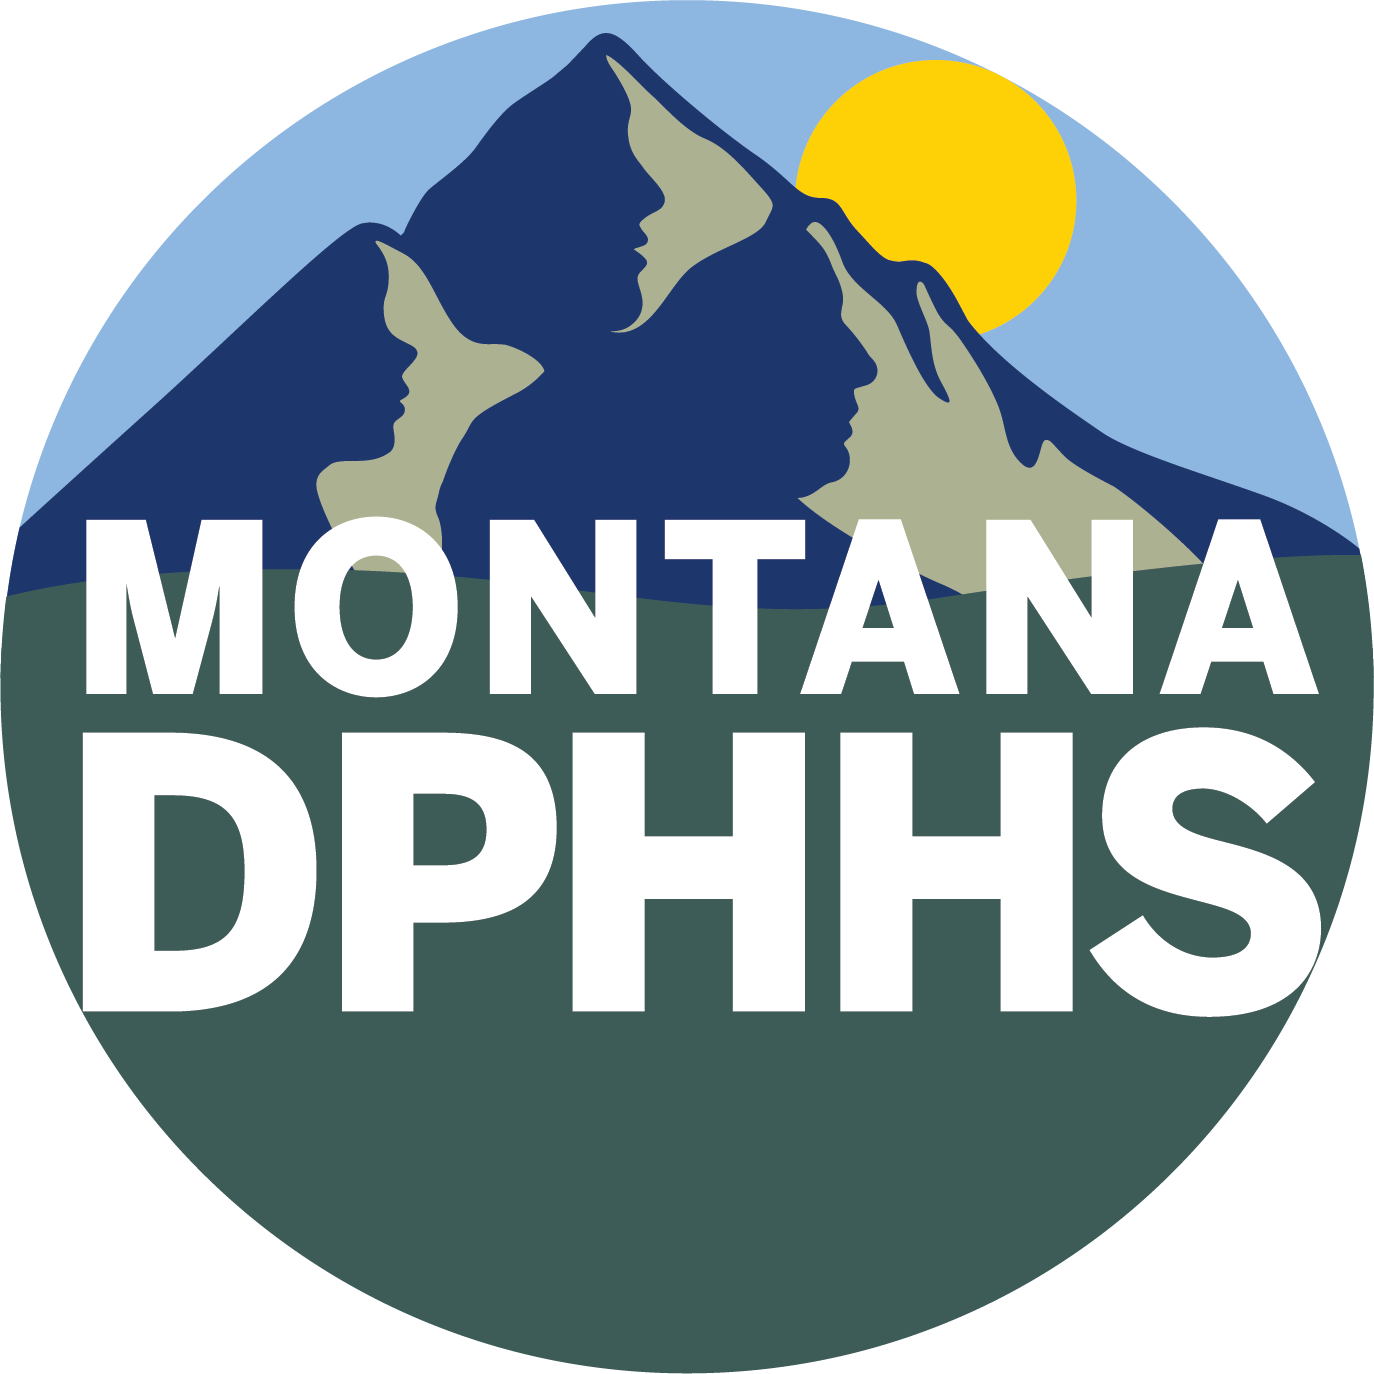 Click here to go to montana dphhs site